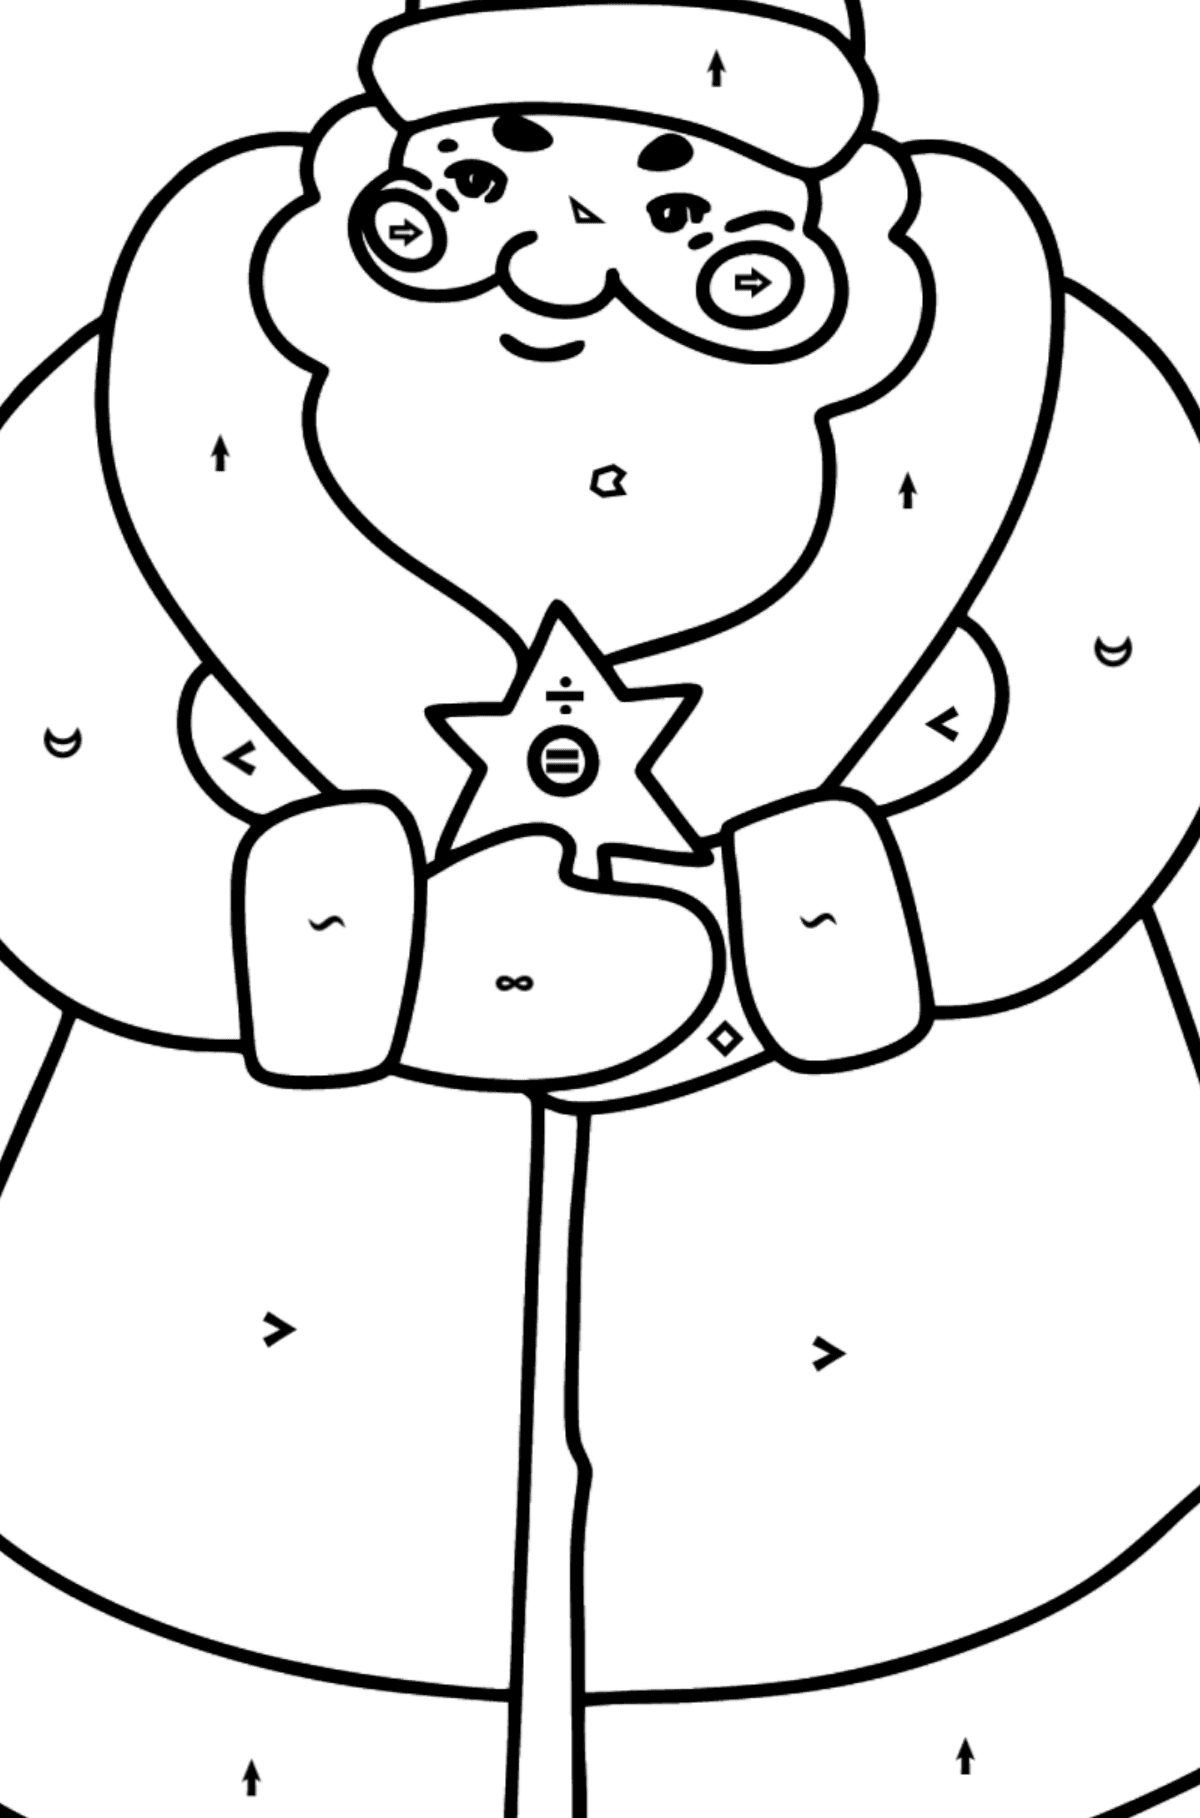 Good Father Frost coloring page - Coloring by Symbols and Geometric Shapes for Kids